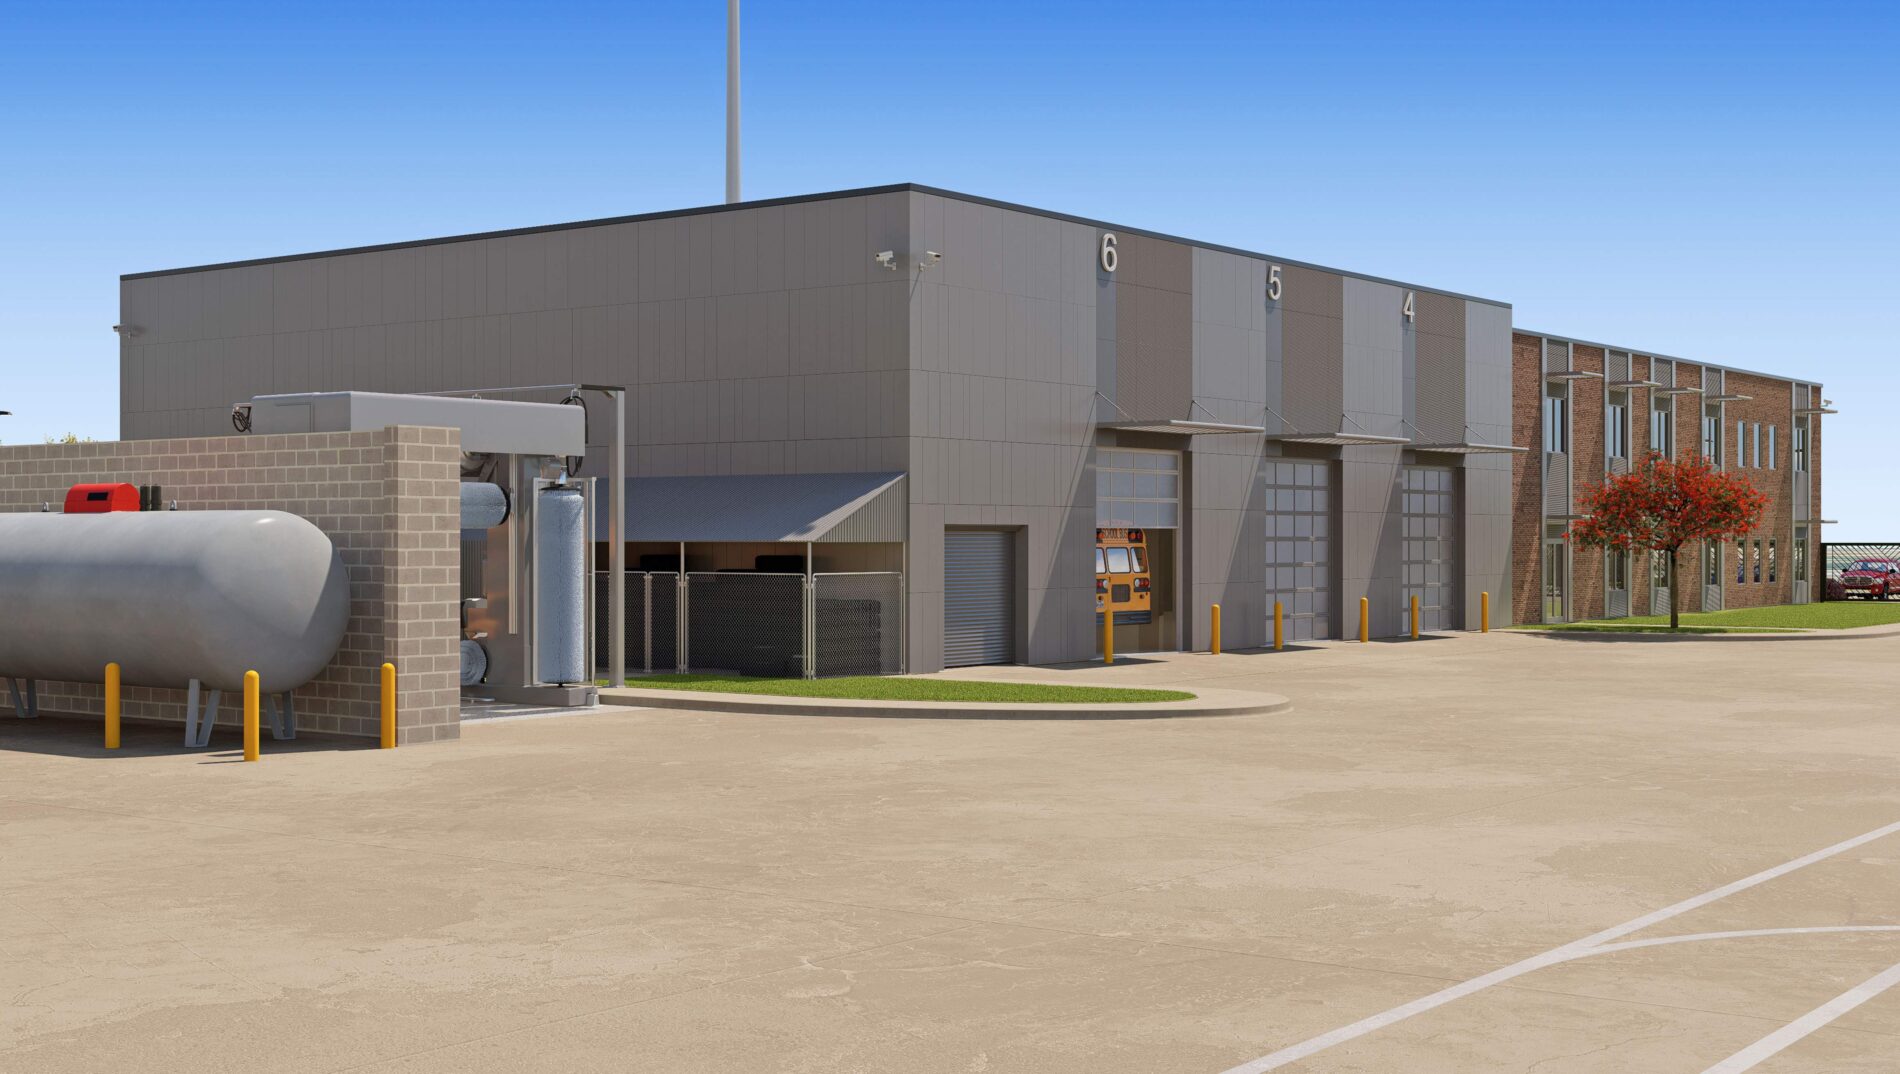 A rendering of the student transportation and logistics center at Irving ISD